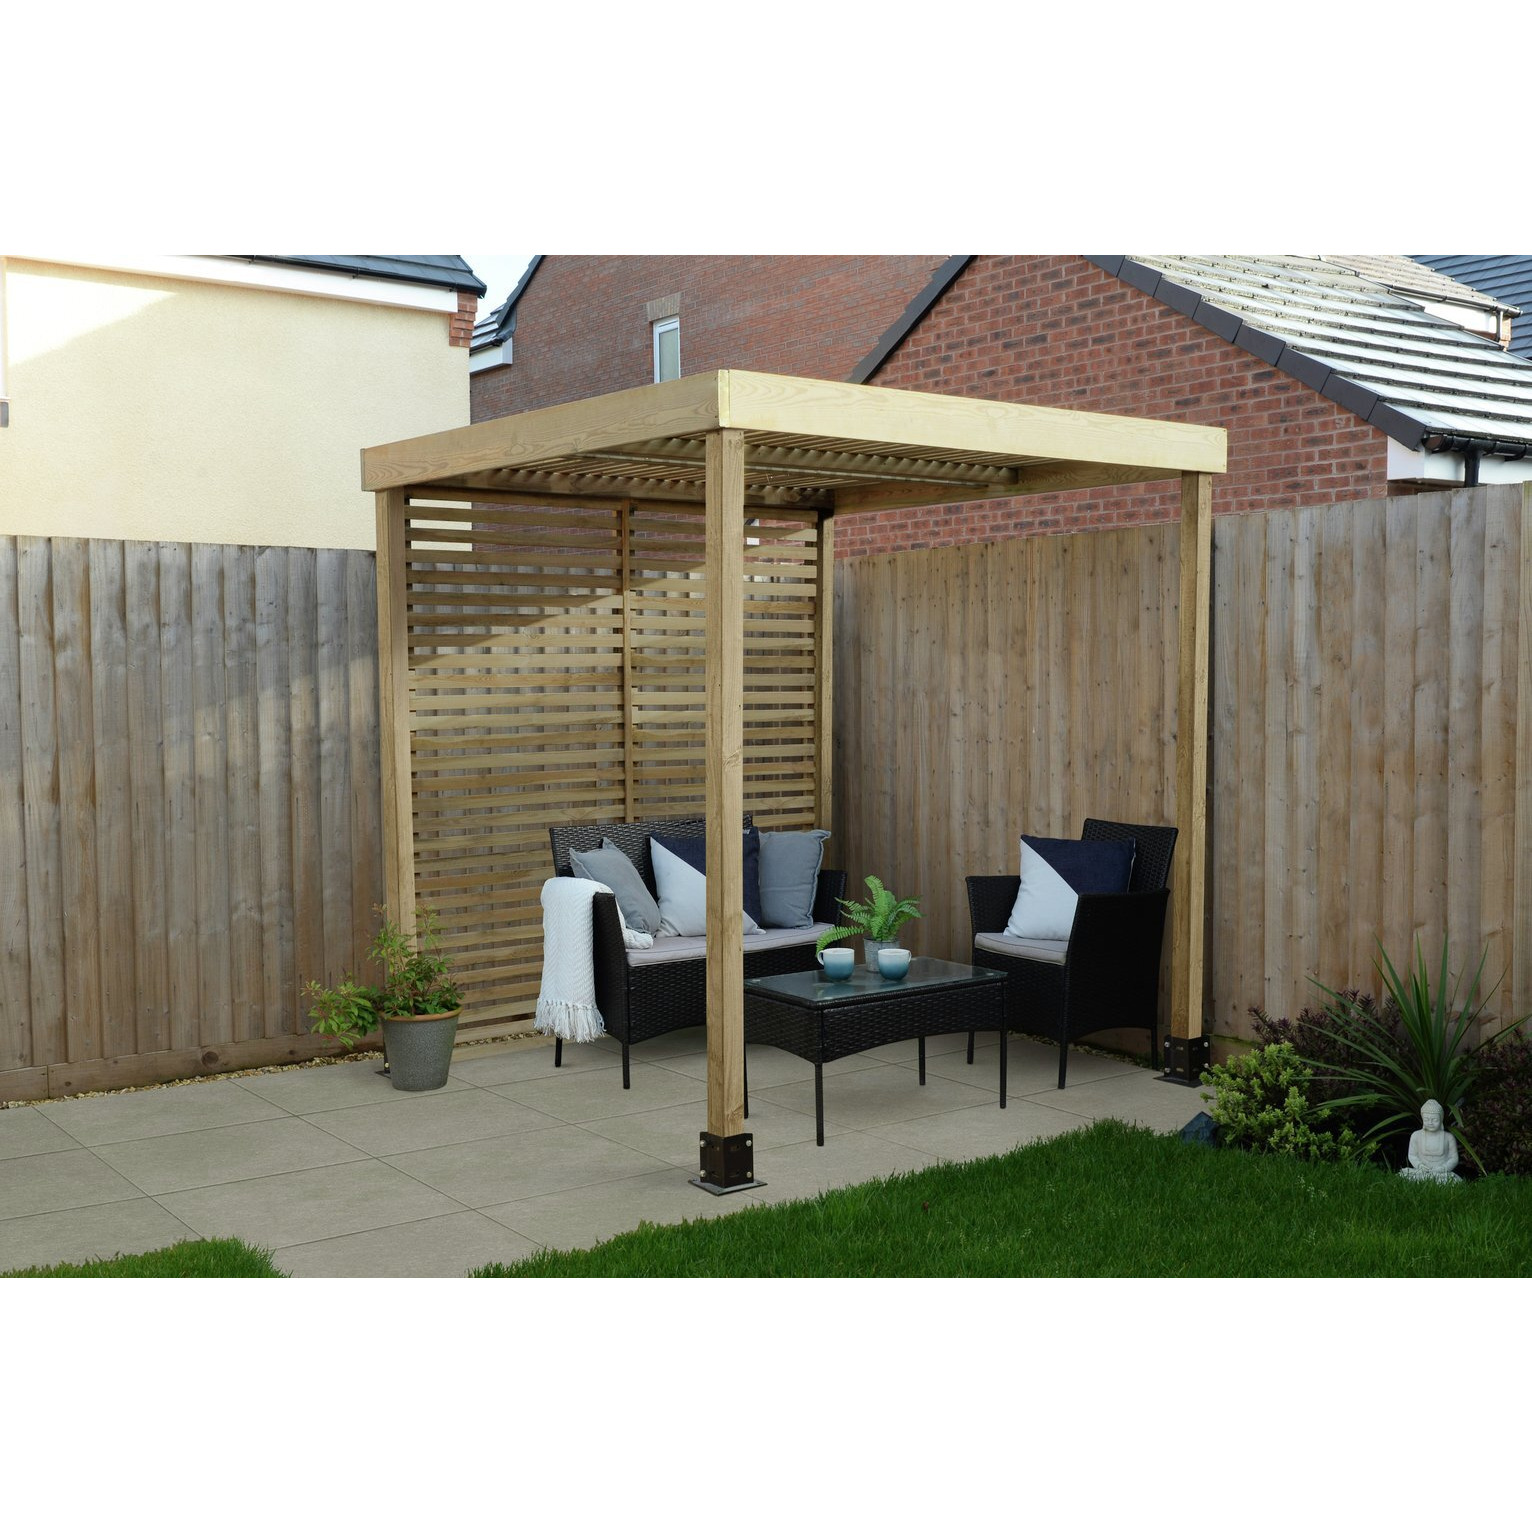 Forest Garden Modular Pergola with Side Panel - image 1